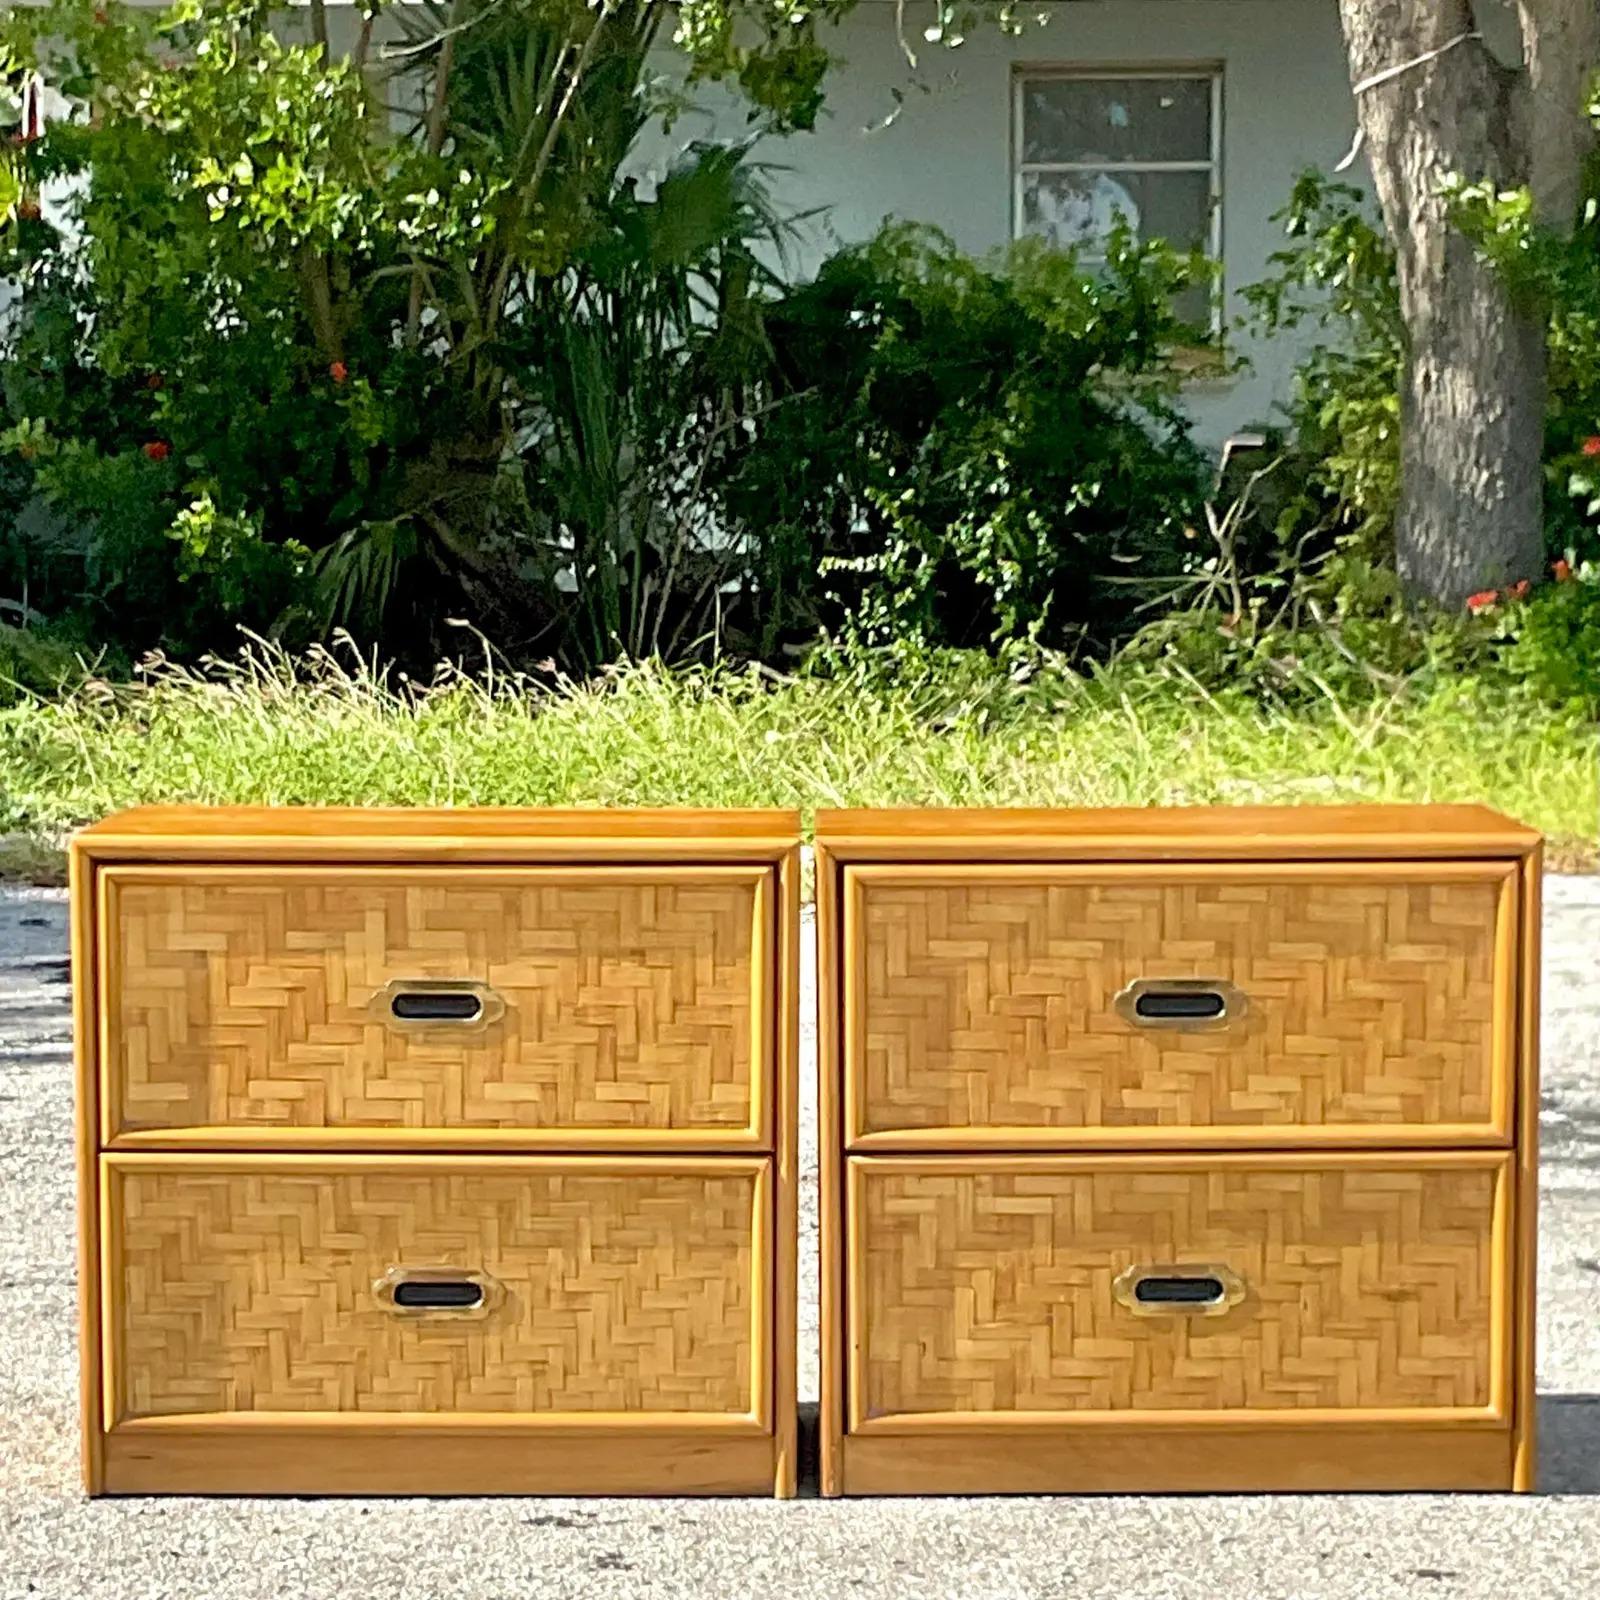 A fabulous pair of vintage Coastal nightstands. Made by the iconic Dixie group. Beautiful parquet rattan with a chic rattan trim. Acquired from a Palm Beach estate.